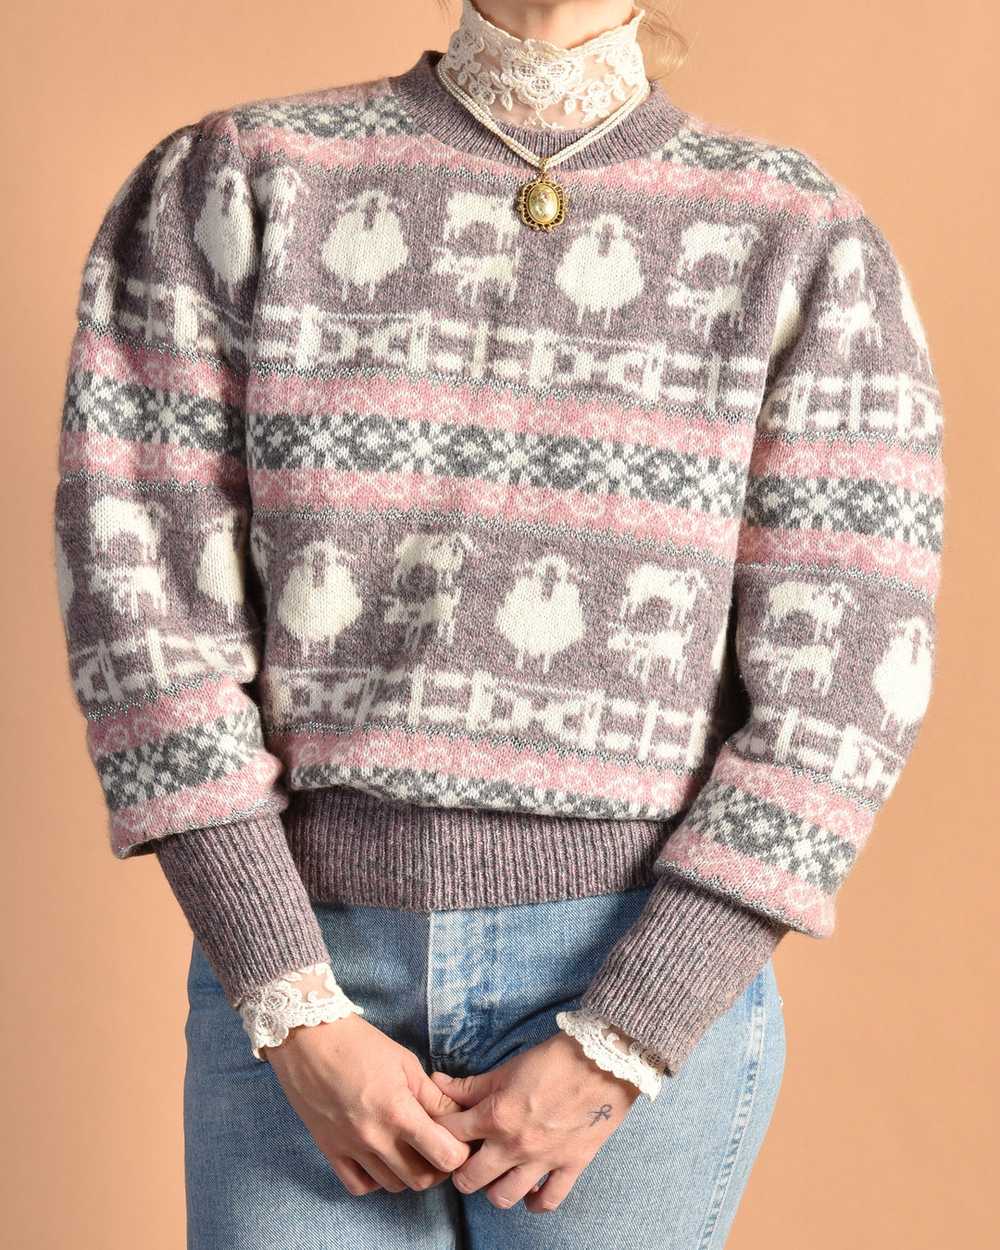 Dorian 1980s Sparkly Wool Sheep Sweater - image 7